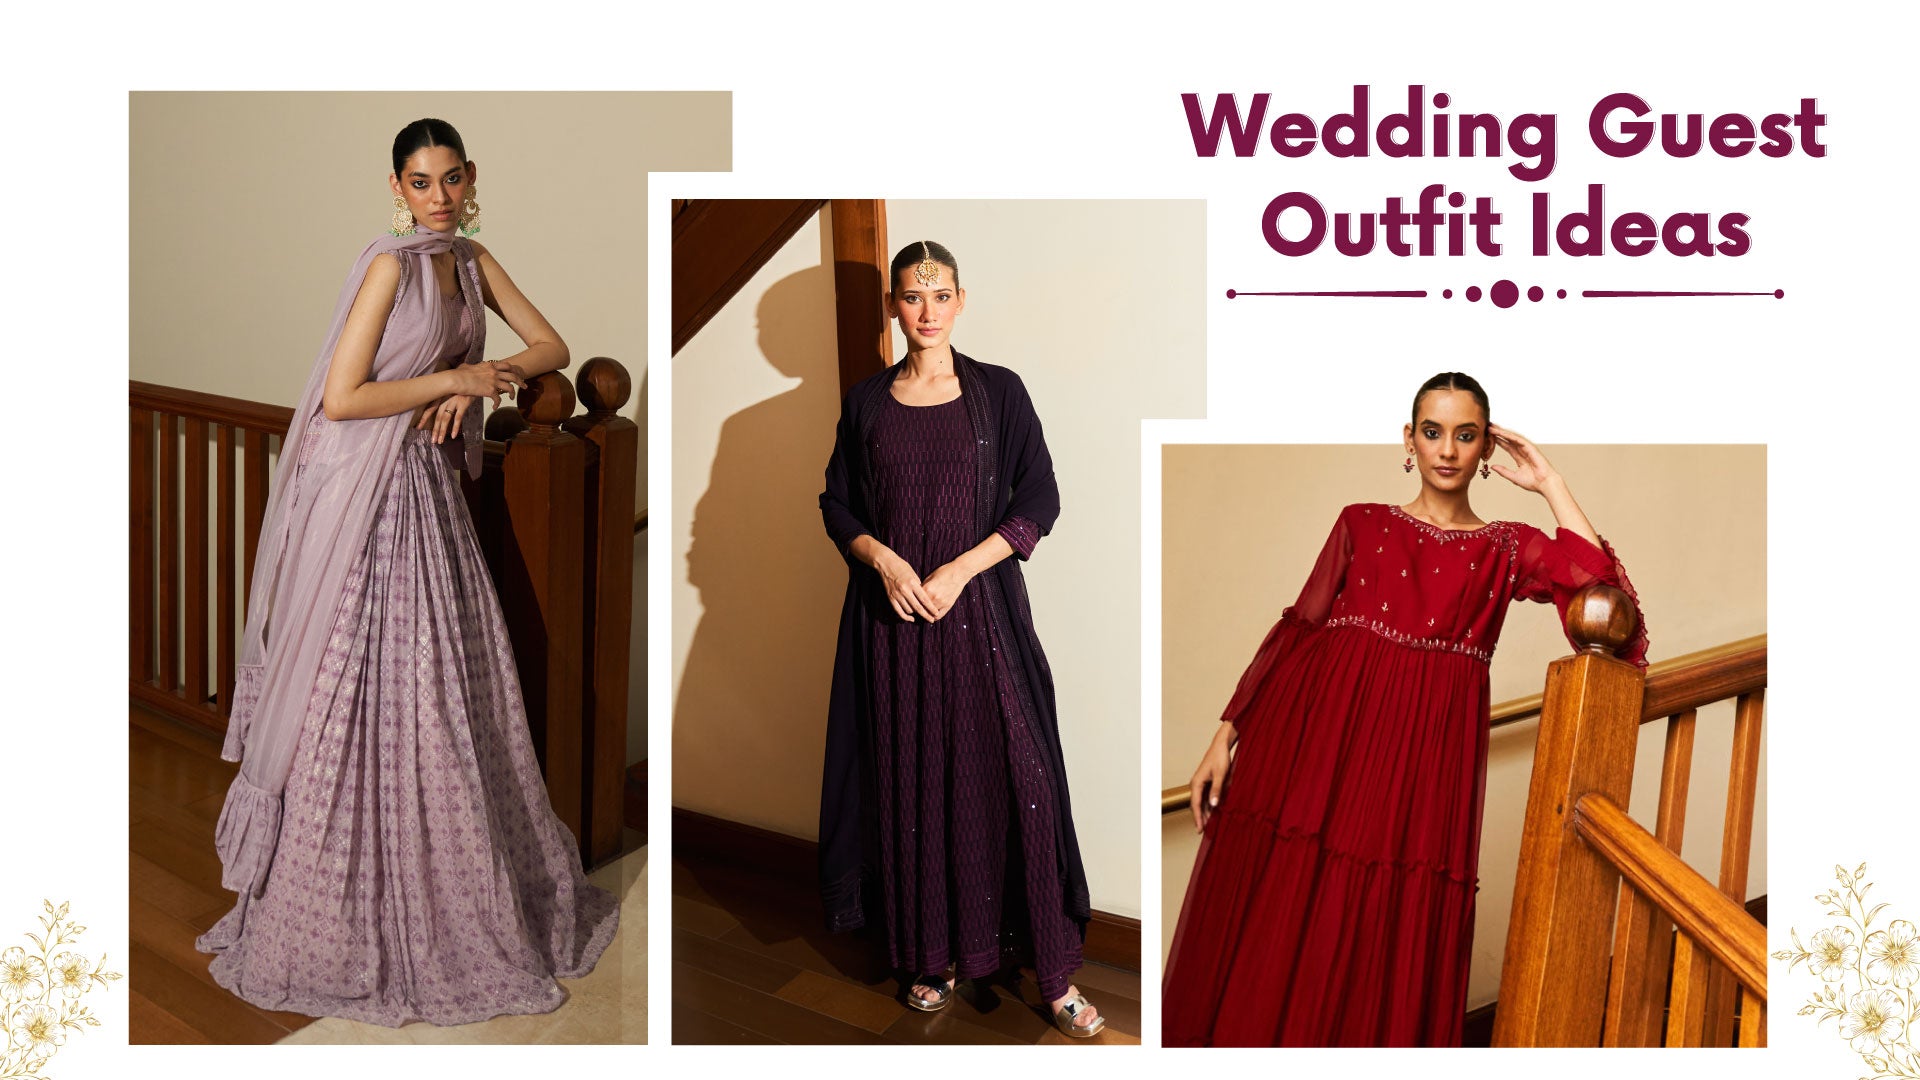 Wedding Guest Outfit Ideas To Stand Out - Raisin